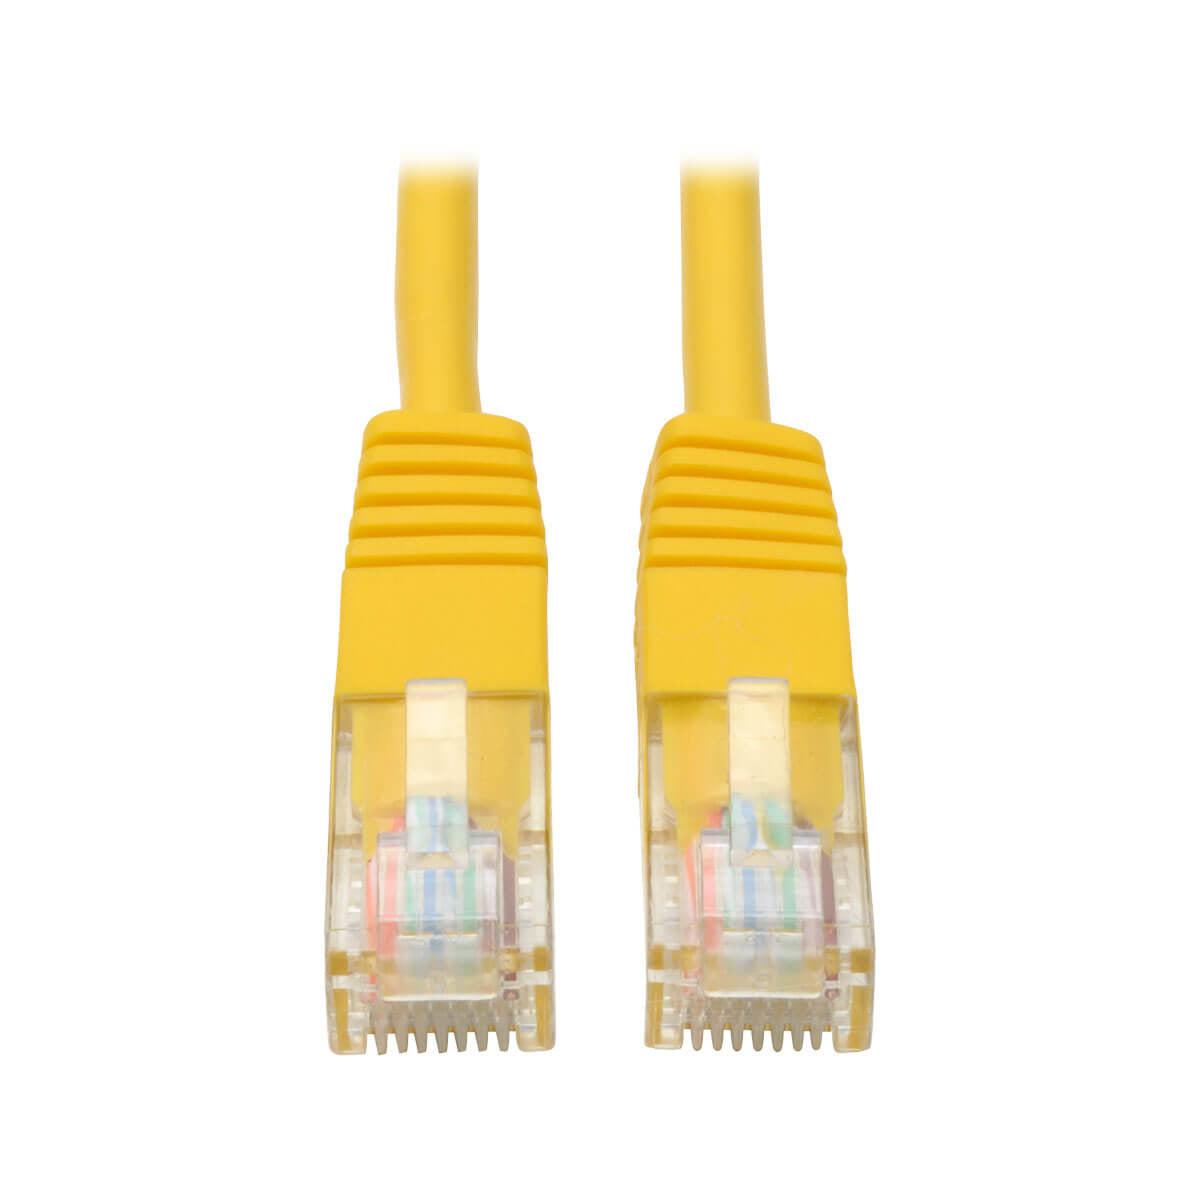 Tripp Lite N002-015-Yw Cat5E 350 Mhz Molded (Utp) Ethernet Cable (Rj45 M/M) - Yellow, 15 Ft. (4.57 M)